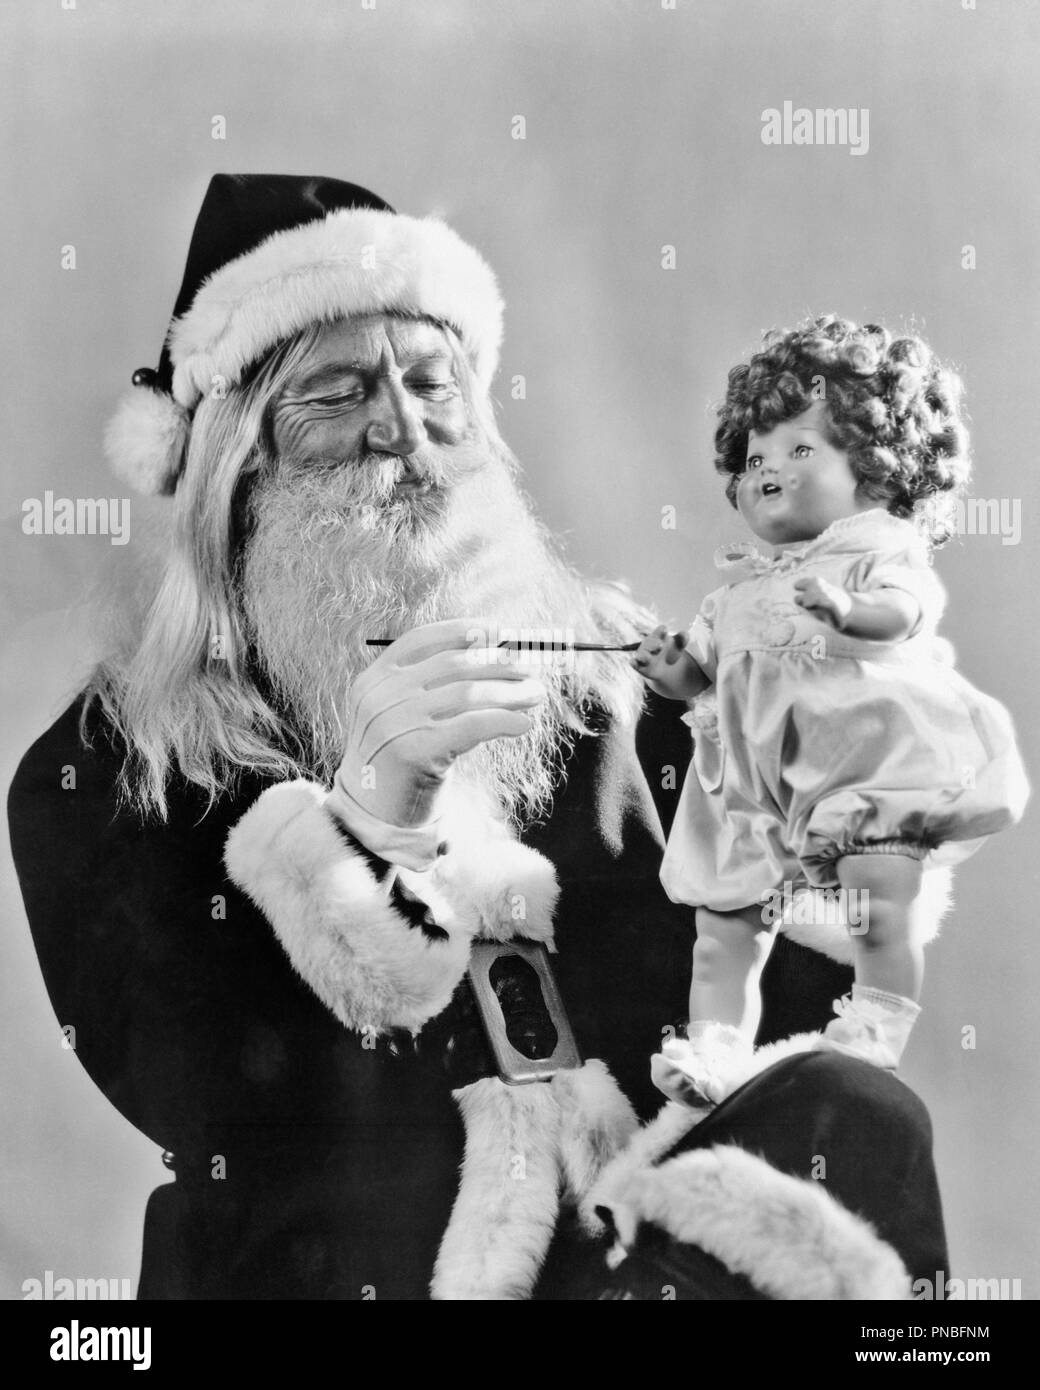 1930s SMILING SANTA CLAUSE PAINTING HAND ON TOY DOLL - ap009782 CAM001 HARS ICON PERSONS MALES SENIOR MAN SAINT SENIOR ADULT B&W ICONS OLDSTERS CHEERFUL OLDSTER SYMBOLISM WHISKER SANTA CLAUS CAM001 SAINT NICHOLAS SAINT NICK OLD SAINT NICK FACIAL HAIR SMILES ELDERS NICK WHITE FUR WHITE-BEARDED BEARDED JOYFUL KRIS KRINGLE KRINGLE KRIS SYMBOLIC WHITE WHISKER WHITE WHISKERS BEARDS NICHOLAS WHISKERS BLACK AND WHITE CAUCASIAN ETHNICITY DATED OLD FASHIONED Stock Photo